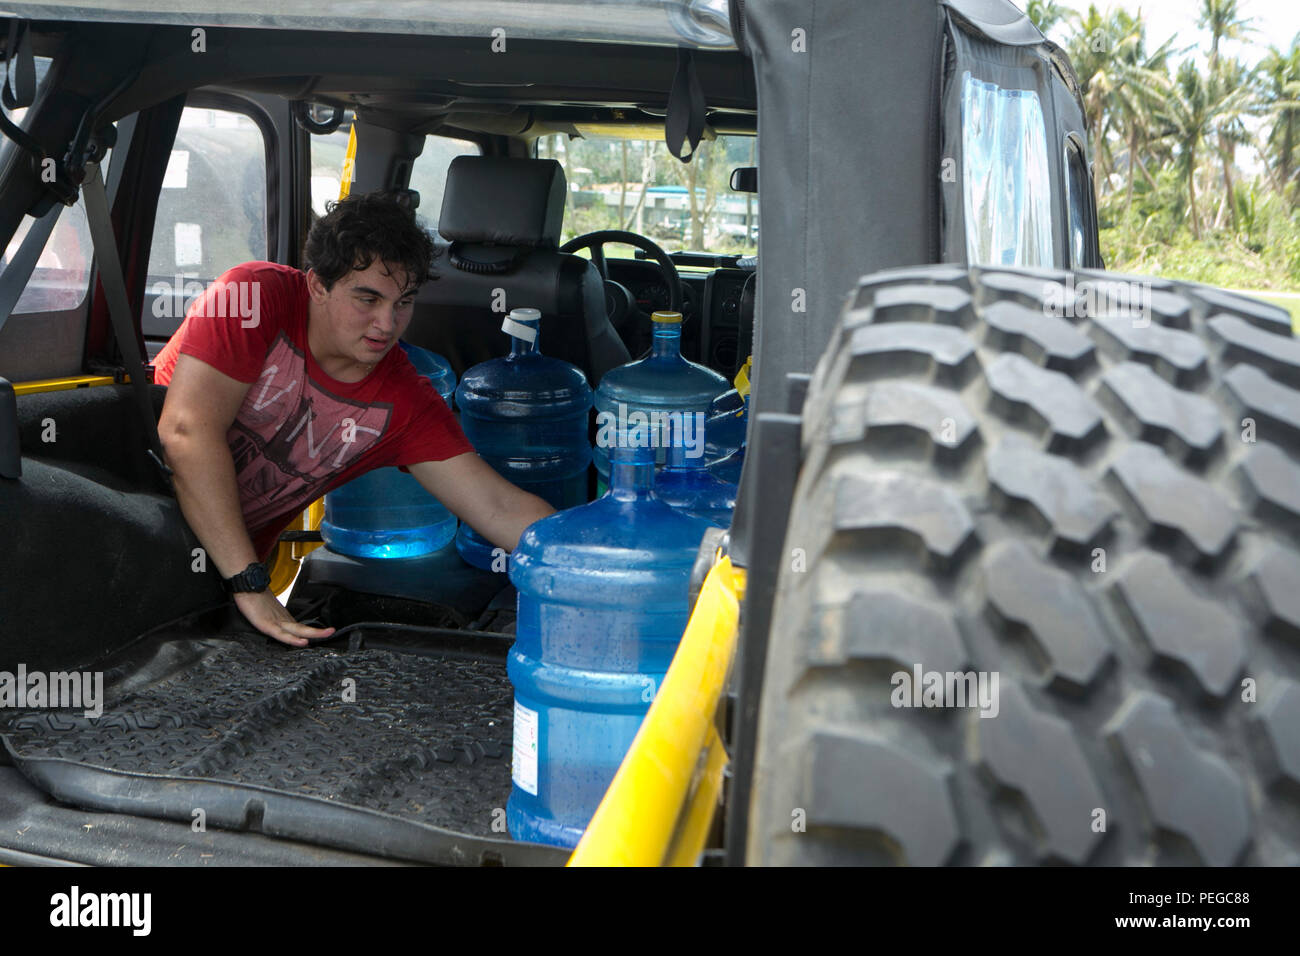 A local man places a water jug in his Jeep at a water distribution site set up by Marines with Combat Logistics Battalion 31, 31st Marine Expeditionary Unit, as part of typhoon relief efforts in Saipan, Aug. 11, 2015. The 31st MEU and the ships of the Bonhomme Richard Amphibious Ready Group are assisting the Federal Emergency Management Agency with distributing emergency relief supplies to Saipan after the island was struck by Typhoon Soudelor, Aug. 2-3. (U.S. Marine Corps photo by Lance Cpl. Brian Bekkala/Released.) Stock Photo